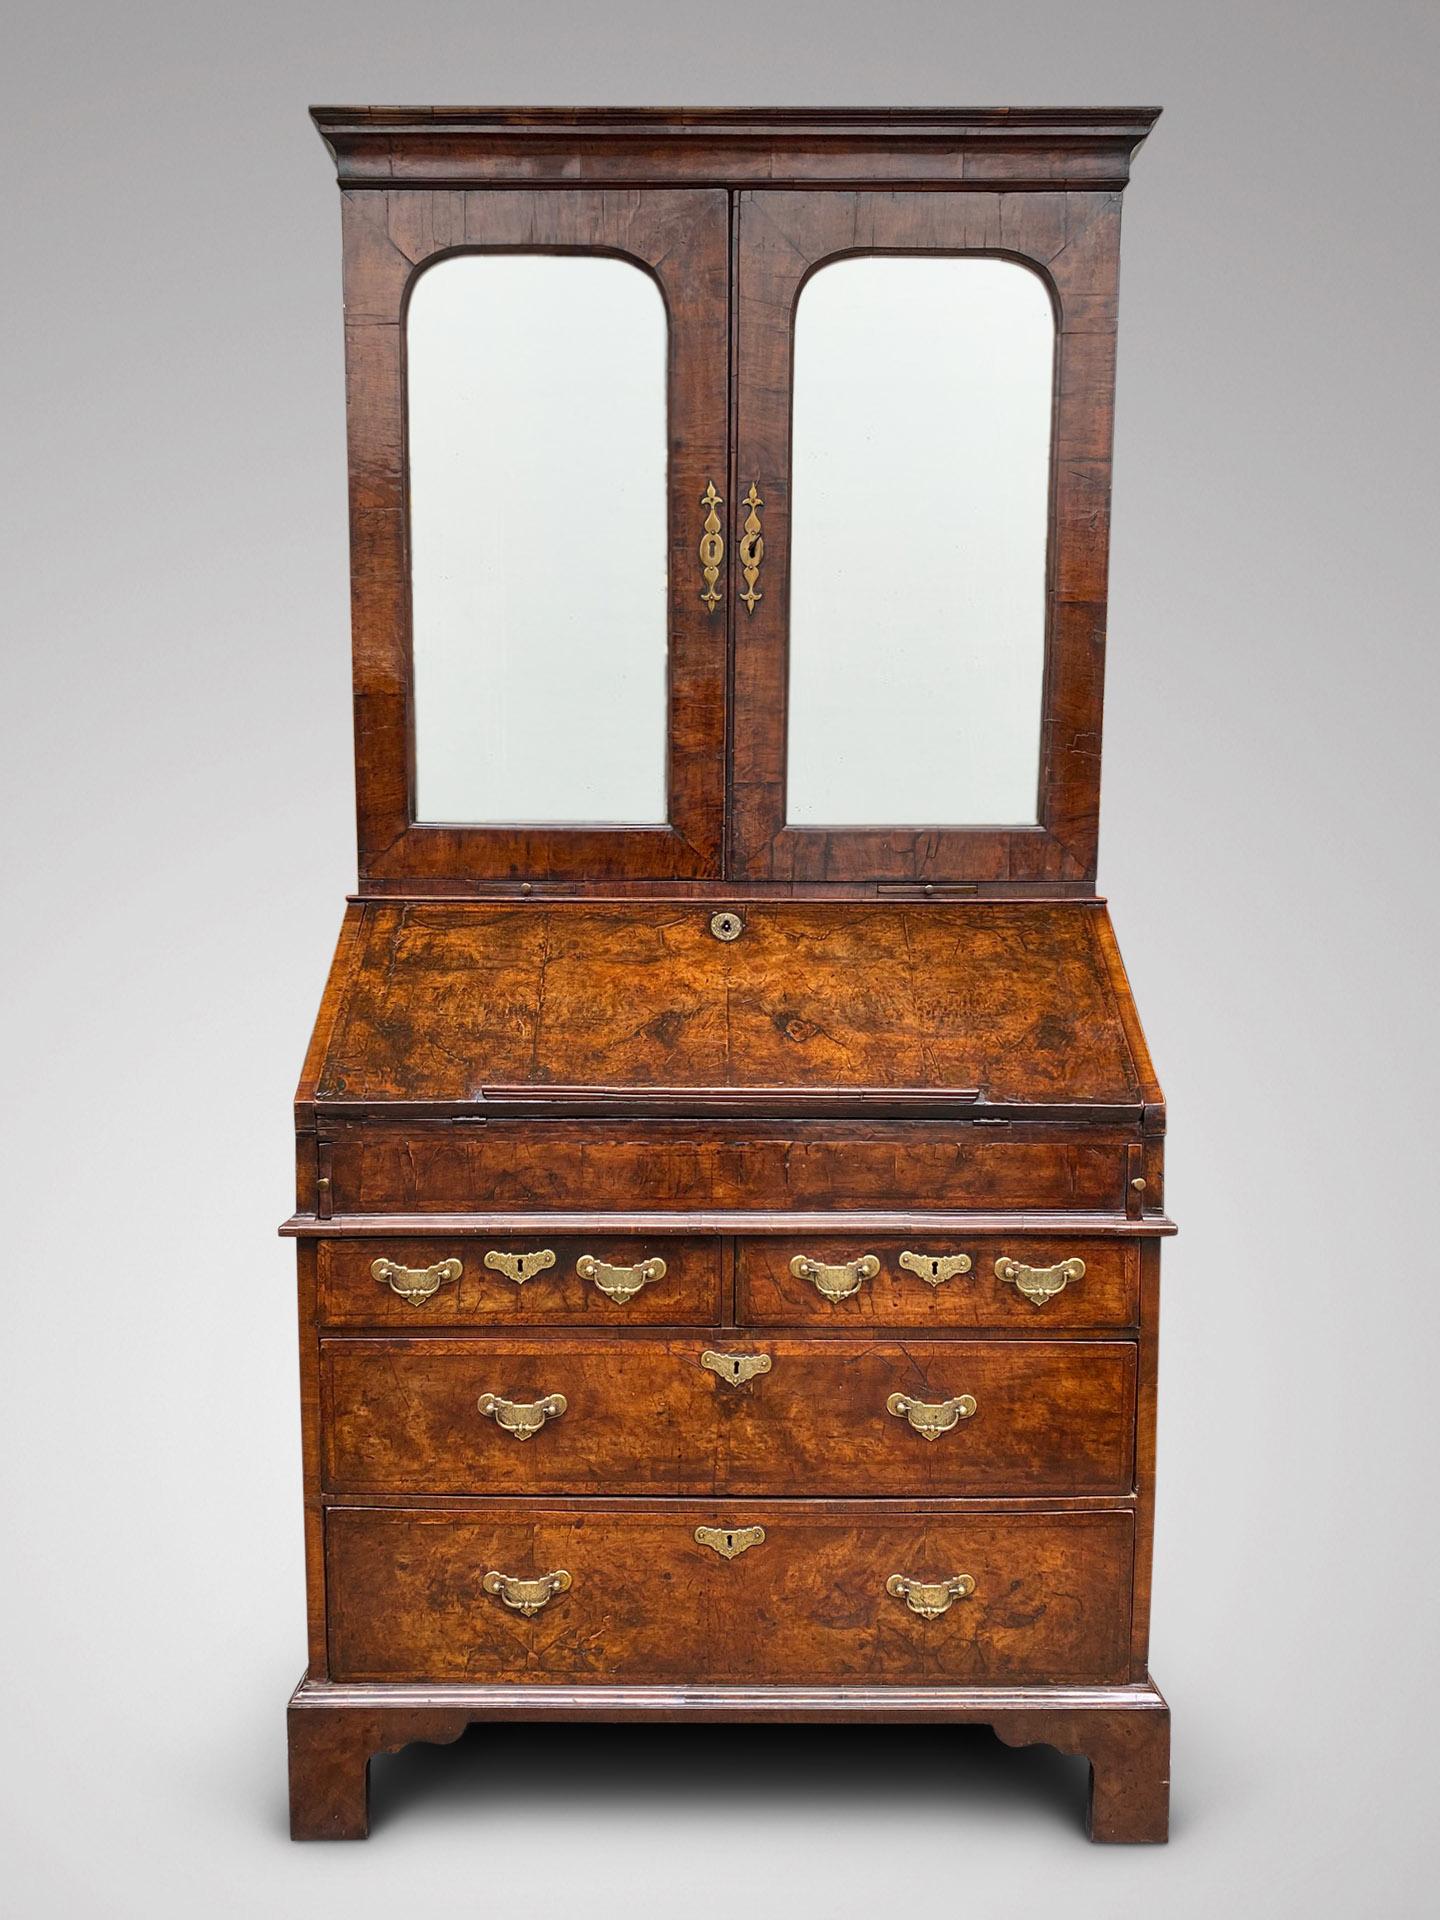 A very fine George I period walnut and feather banded bureau bookcase, circa 1720, the moulded cornice above a pair of mirror panelled doors, opening to an adjustable shelf section above an arrangement of pigeon holes, three small drawers and a pair